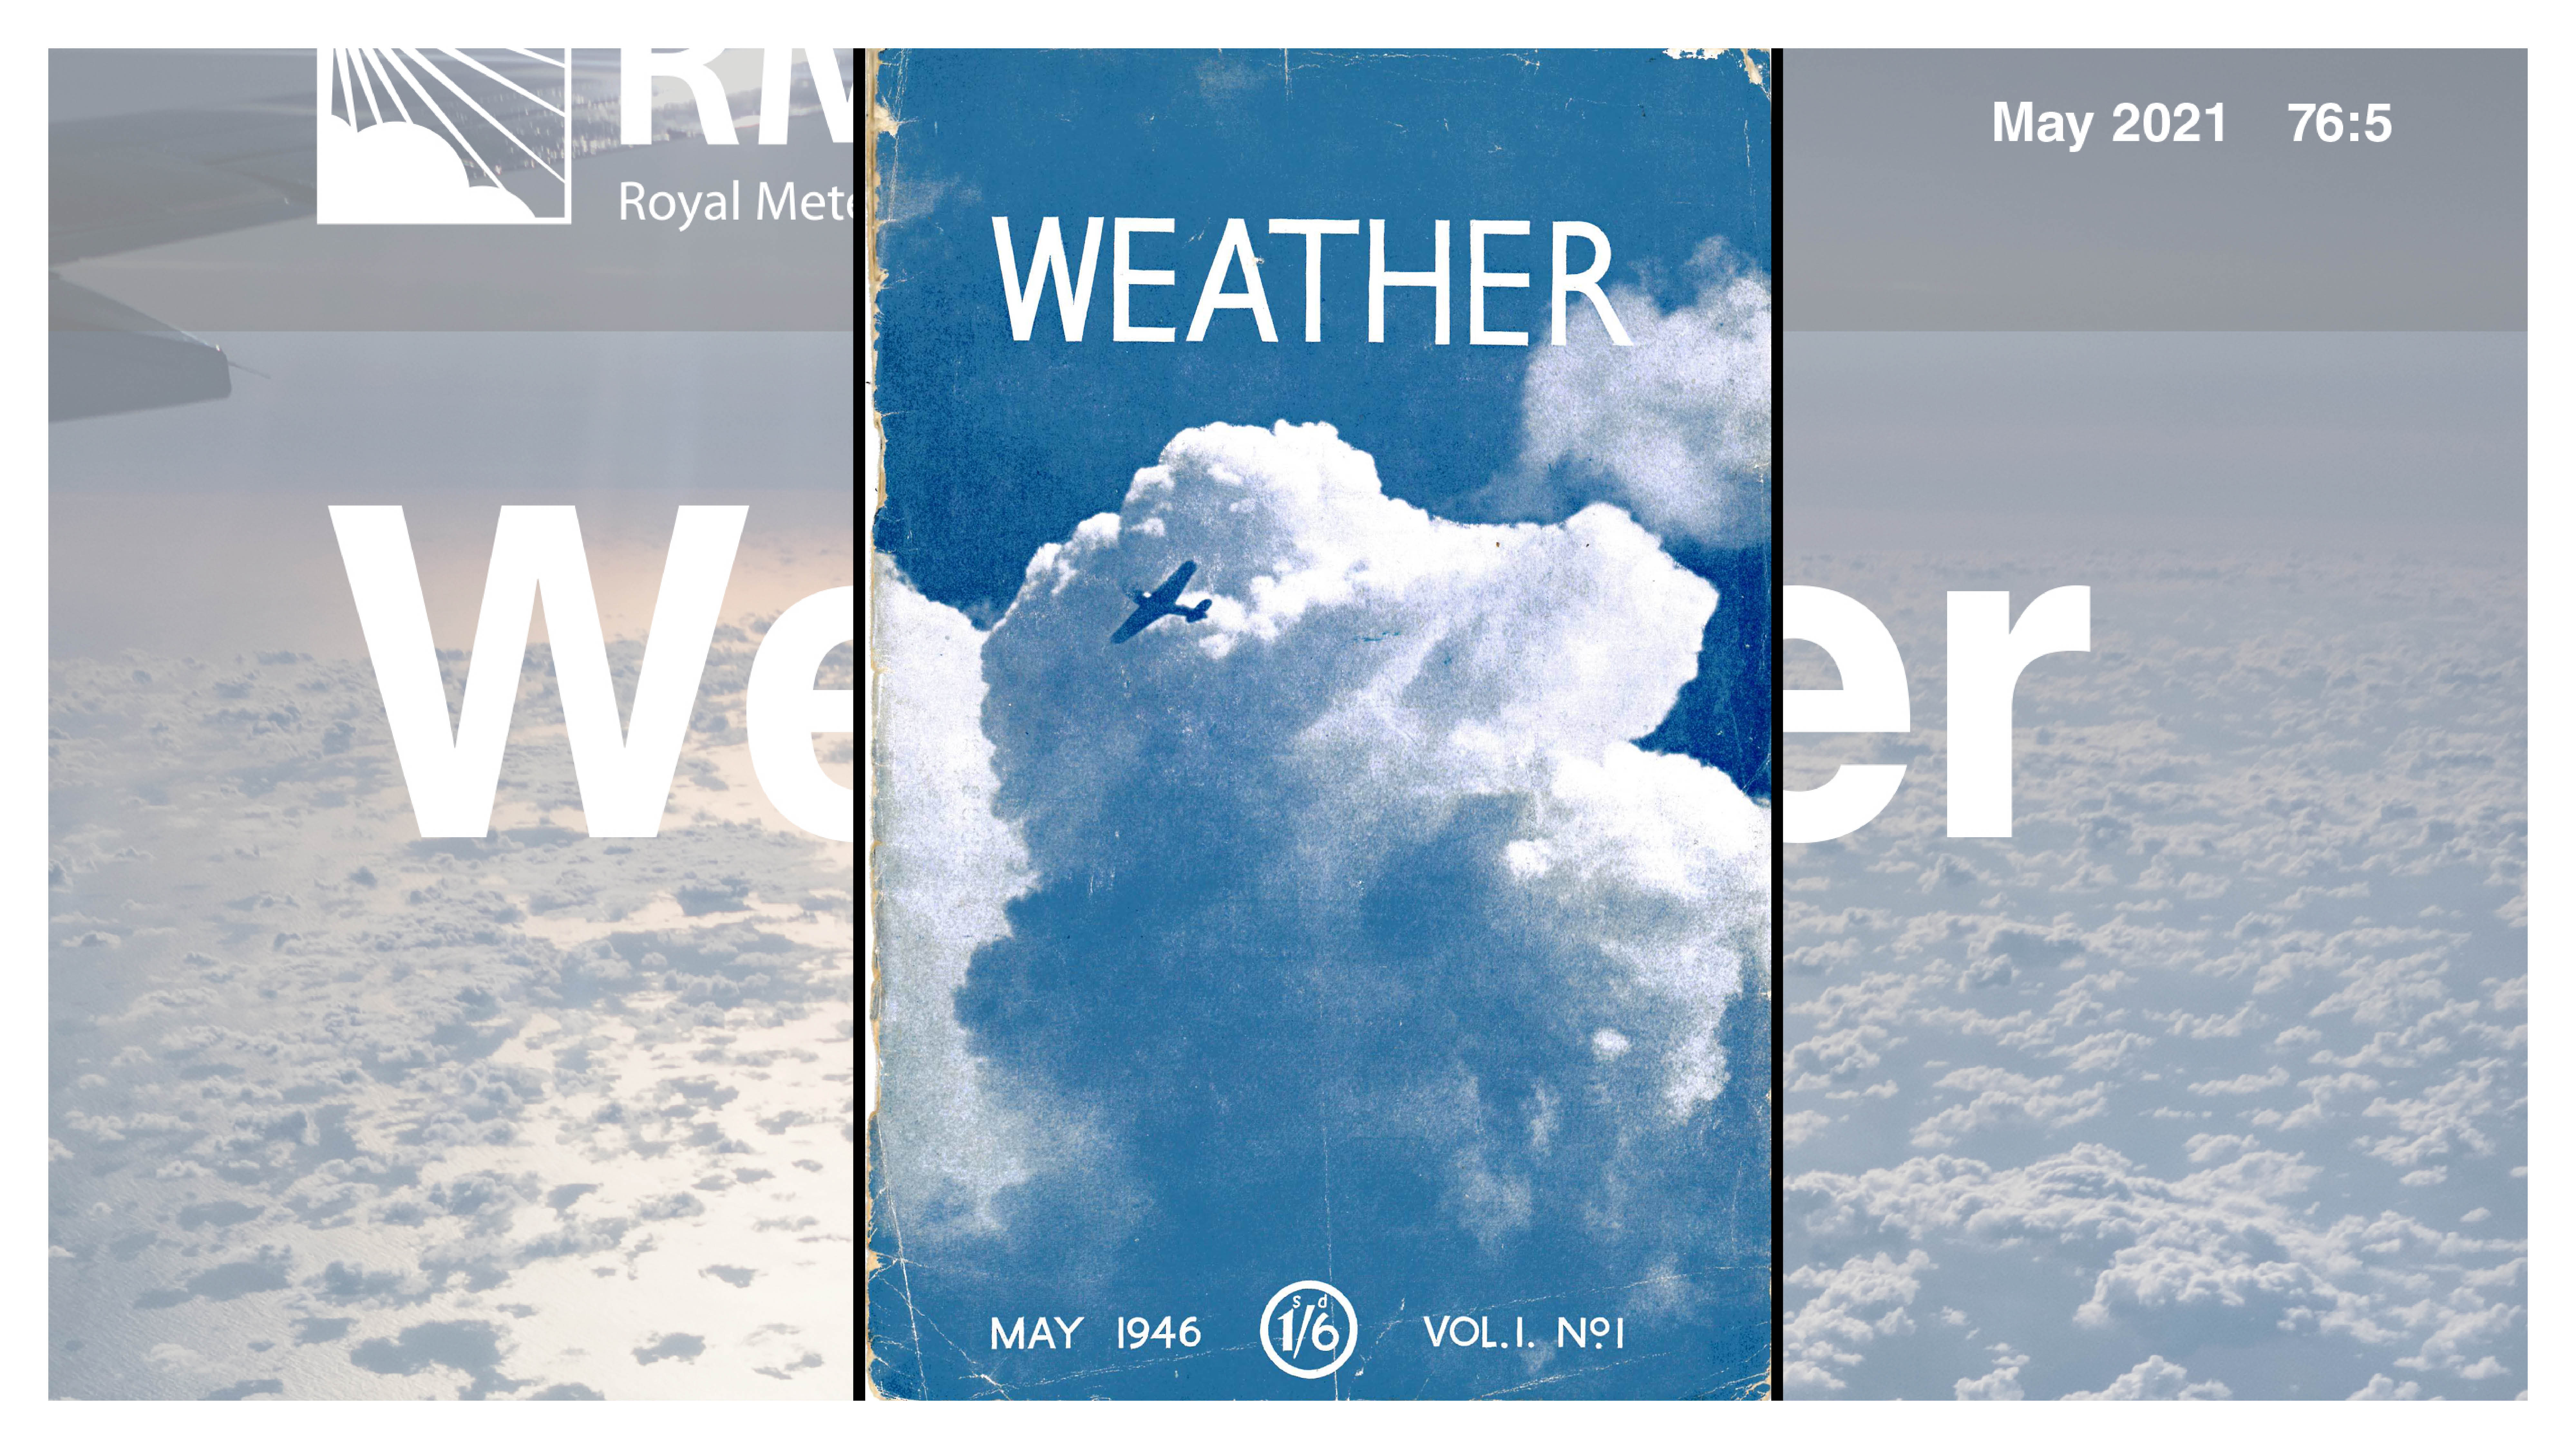 Front cover of 1st issue of Weather - shows a cloud and plane across